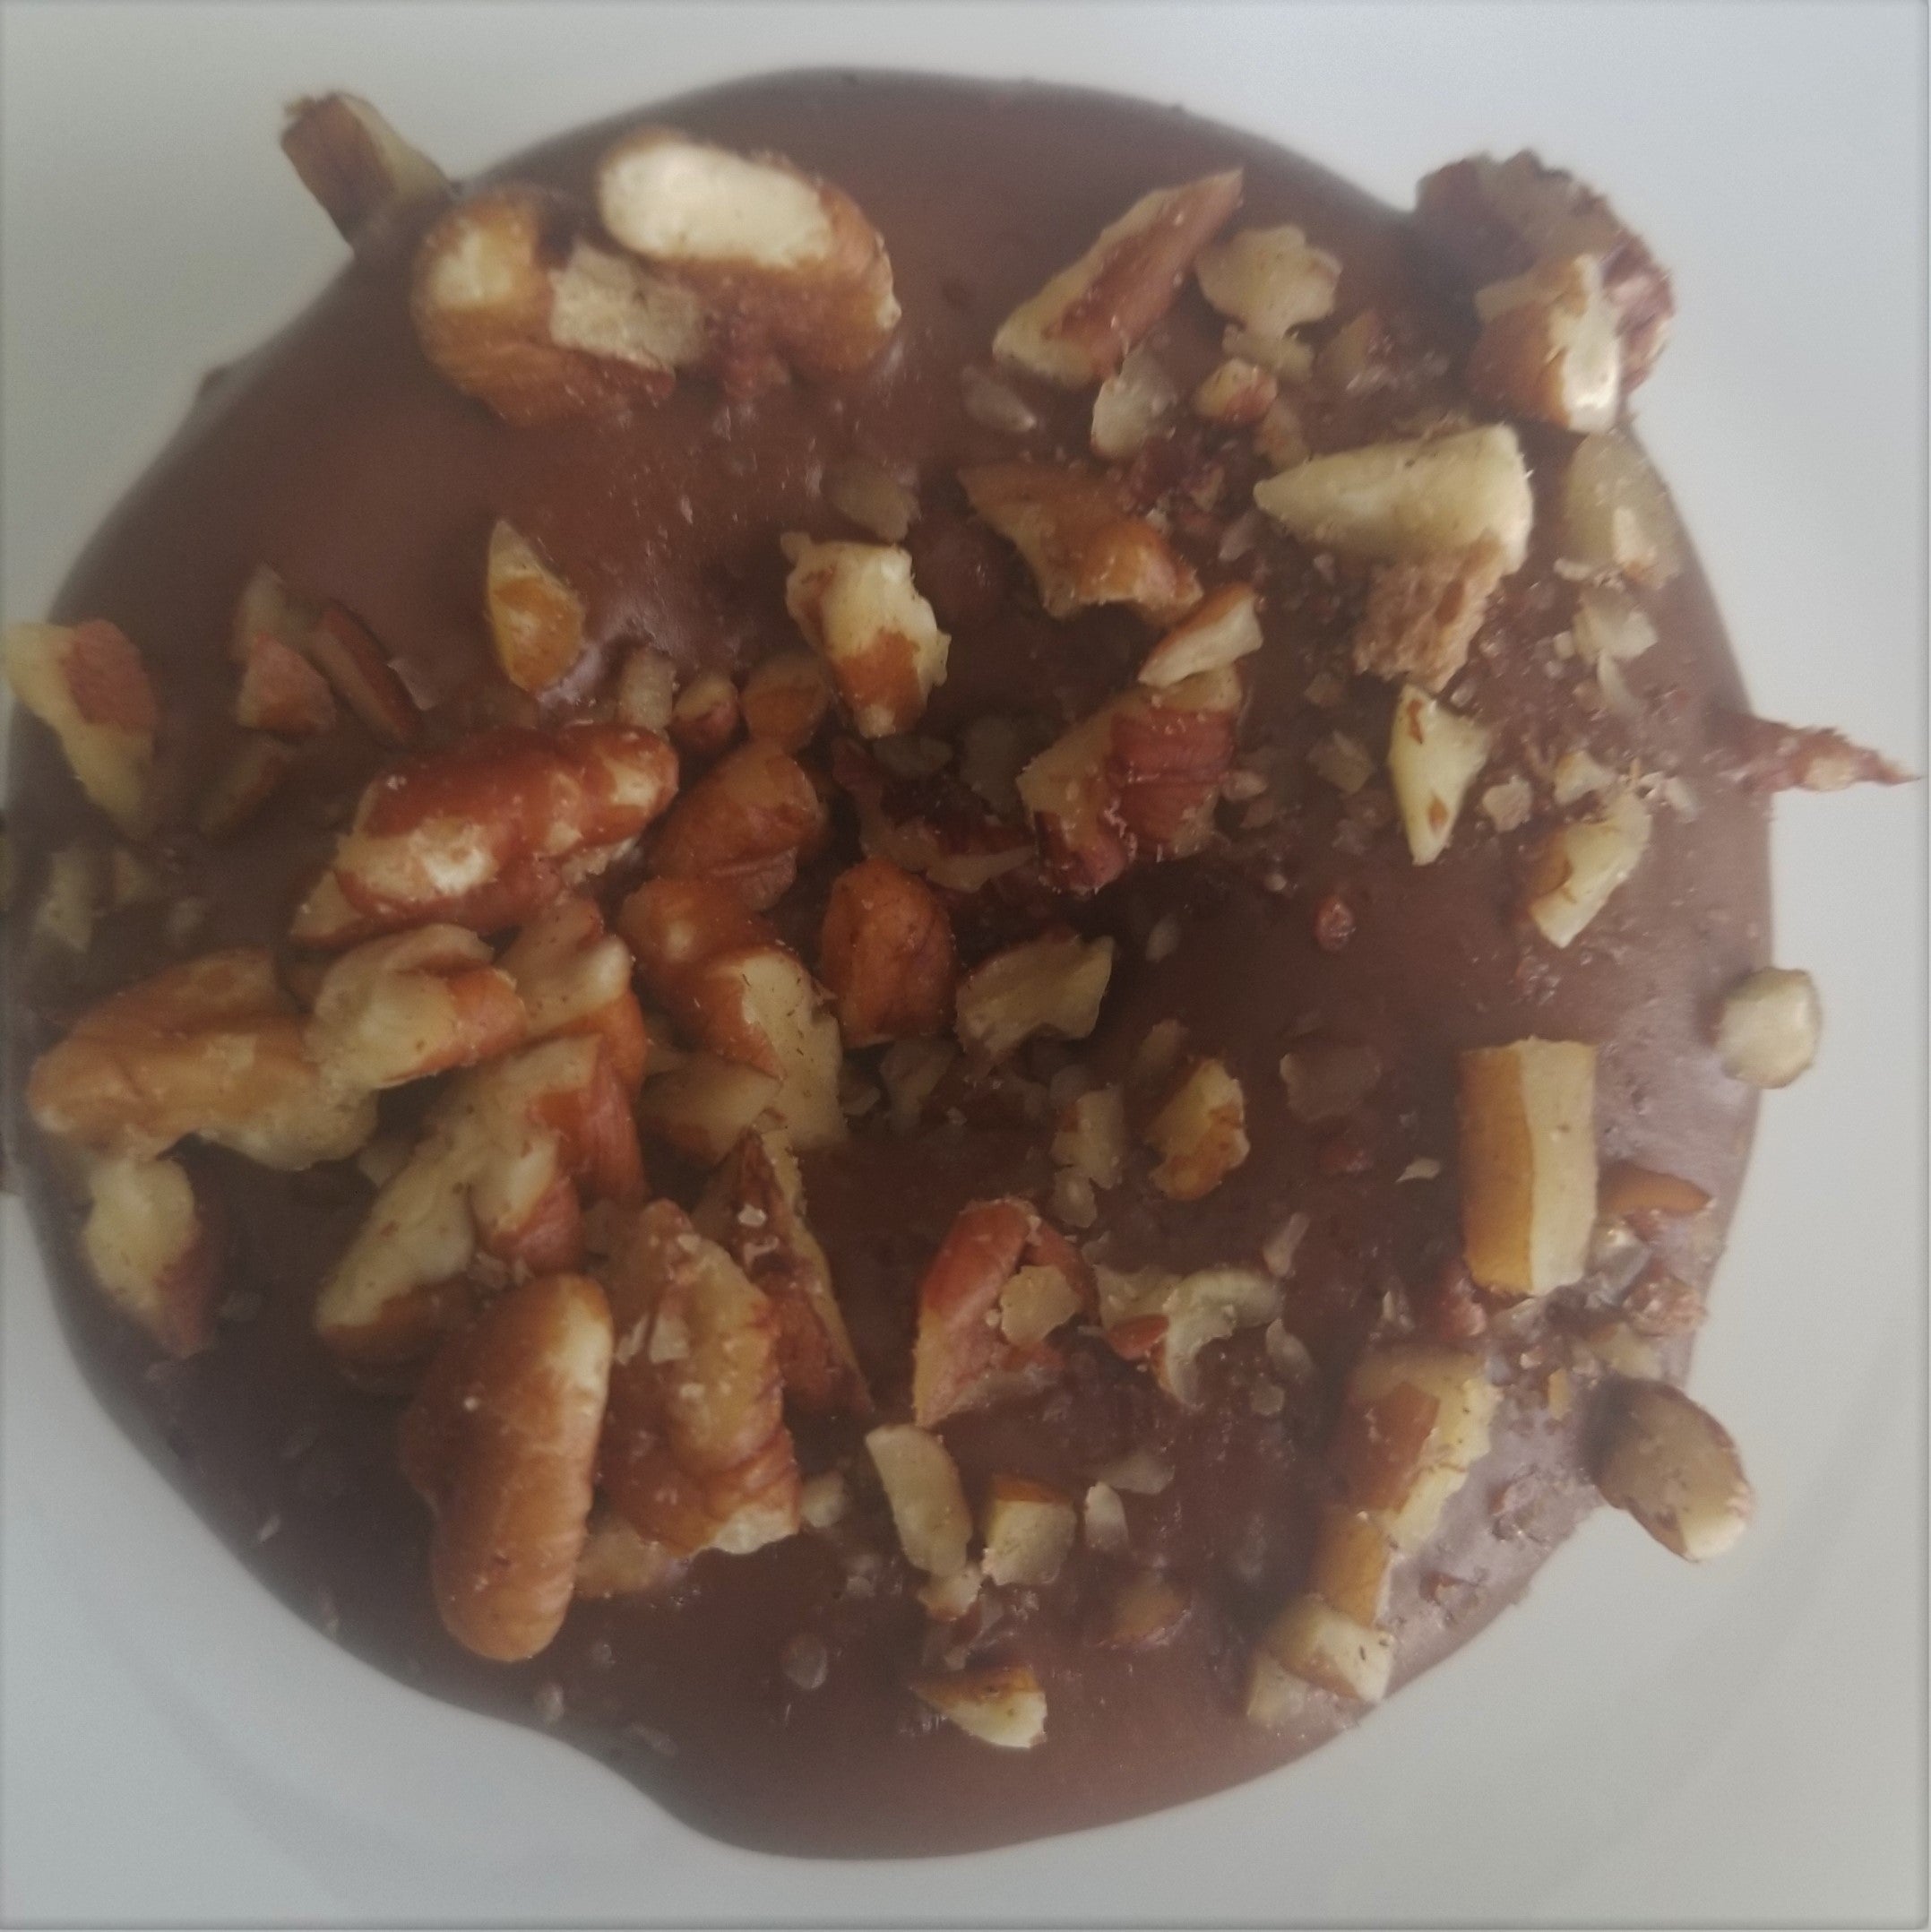 Lo-Ca Chocolate Donut with Chopped Pecans (Calories 330 Net Carbs 3)